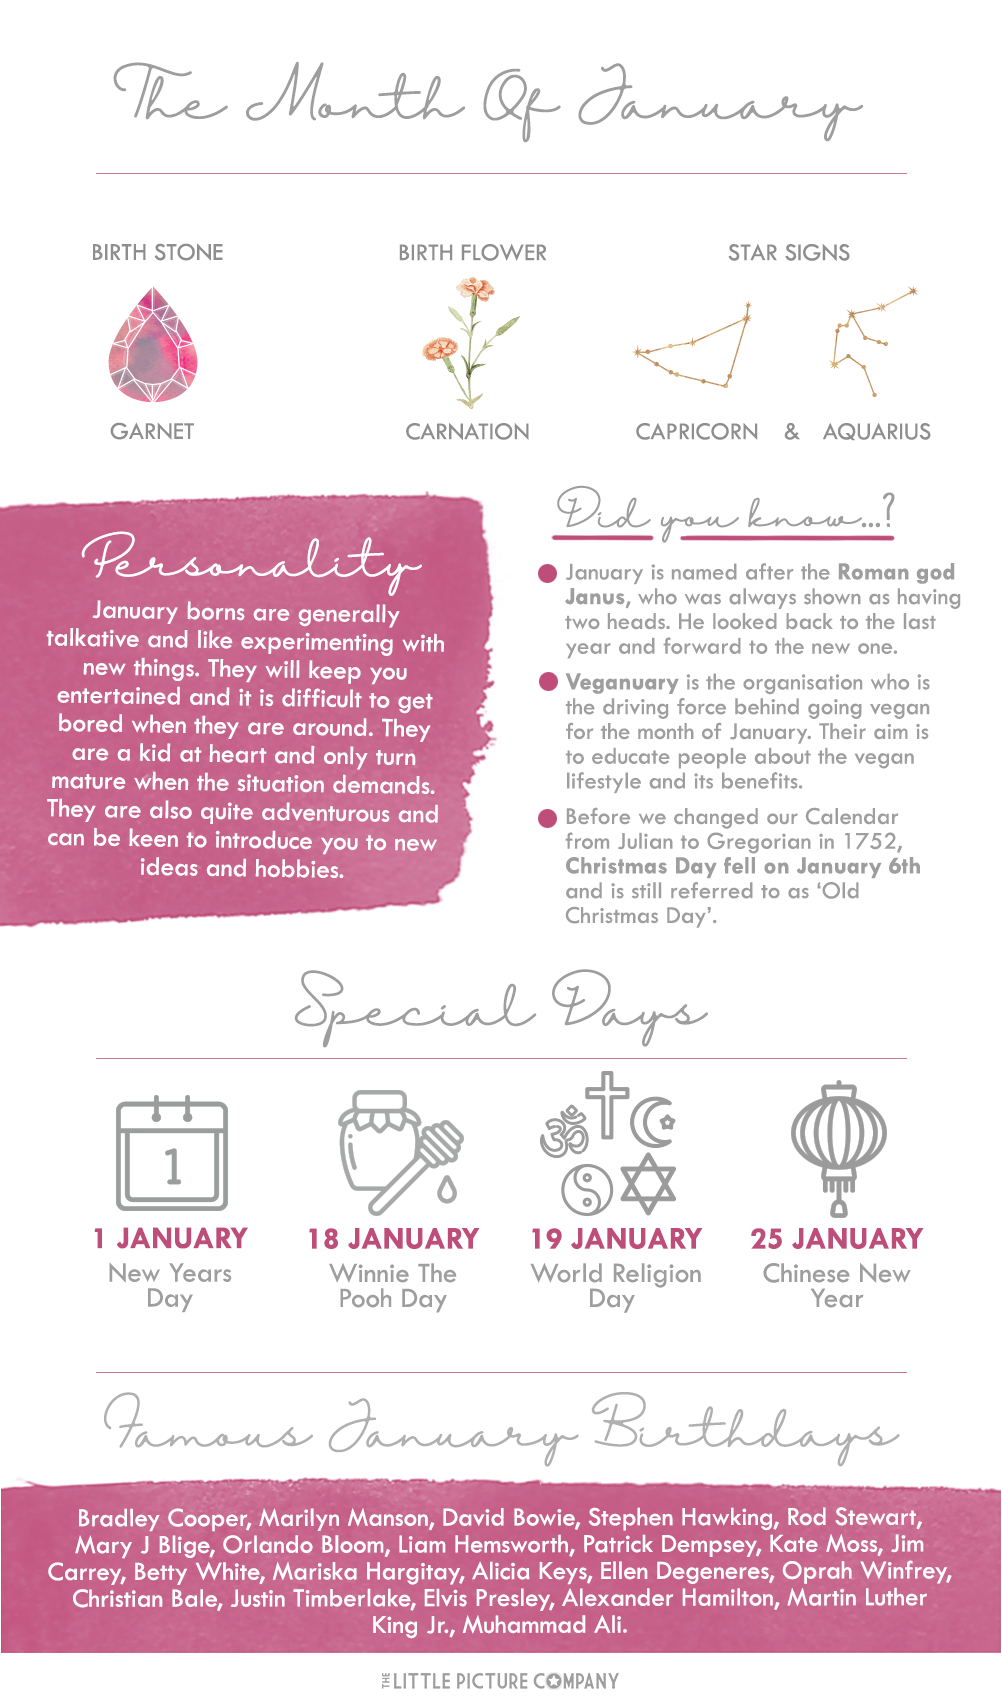 January Birthday Fun Facts and Gift Guide